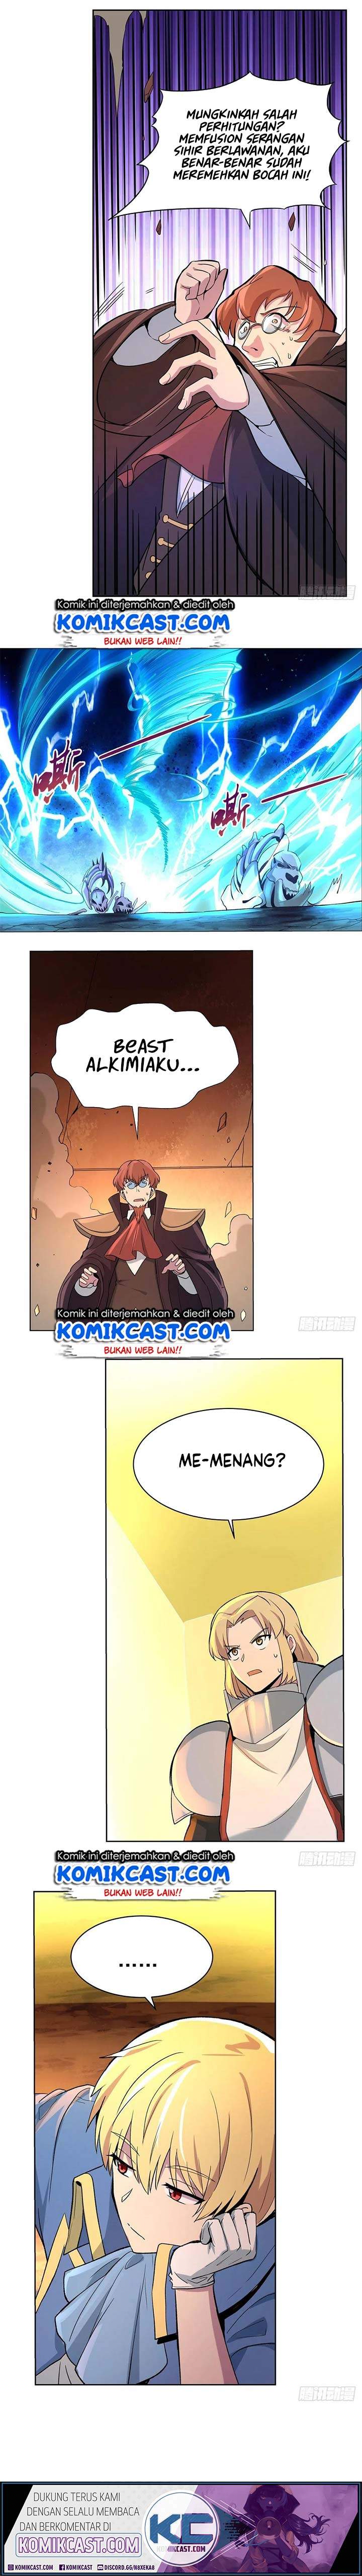 The Demon King Who Lost His Job Chapter 120 Bahasa Indonesia